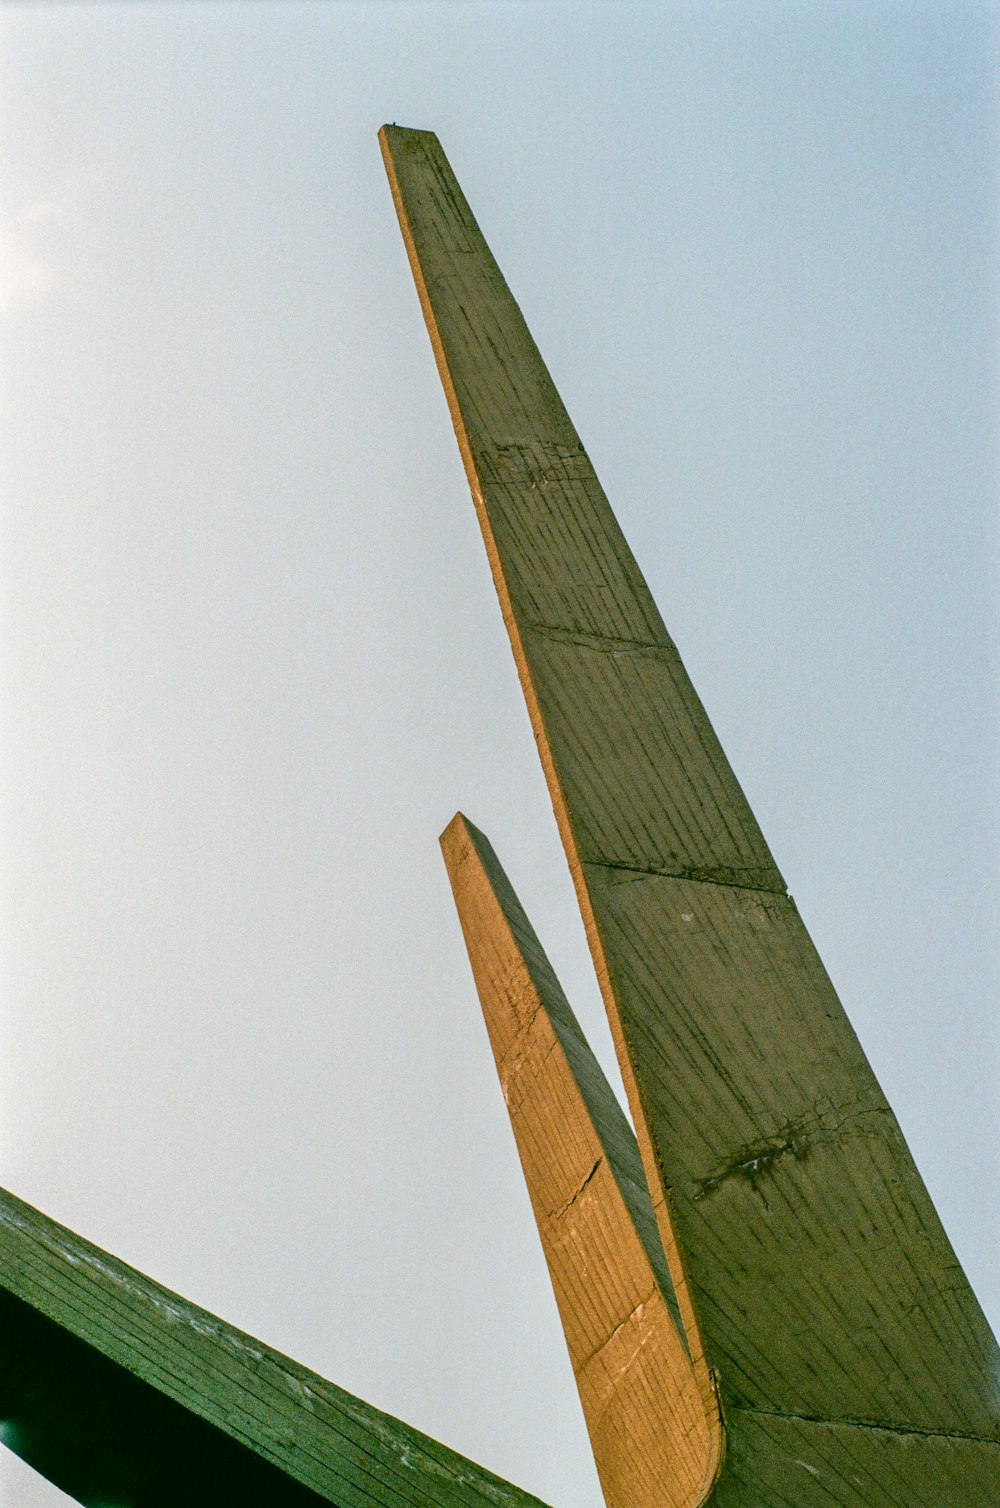 a view of the top of a sailboat against a blue sky